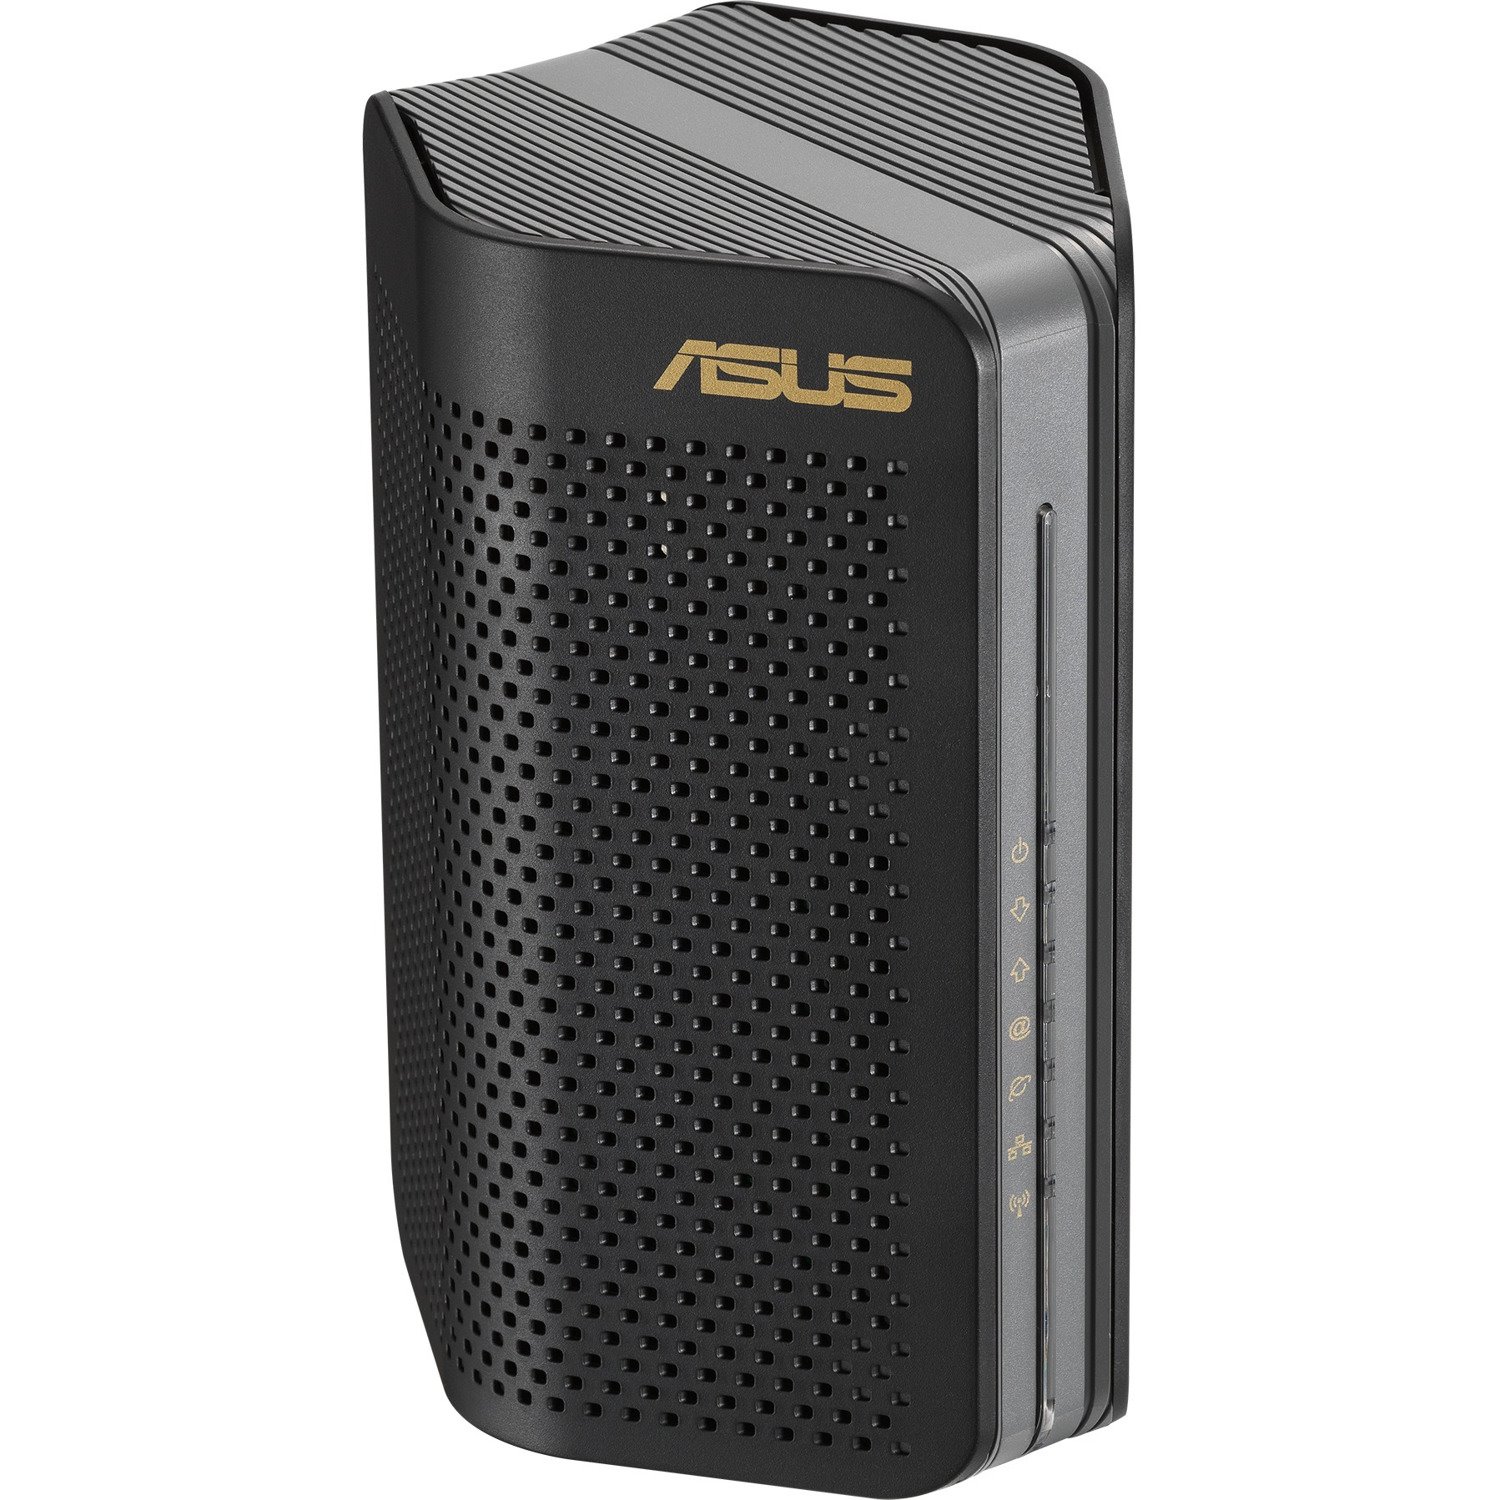 Asus CMAX6000 Wi-Fi 6 IEEE 802.11ax Ethernet, Cable Modem/Wireless Router